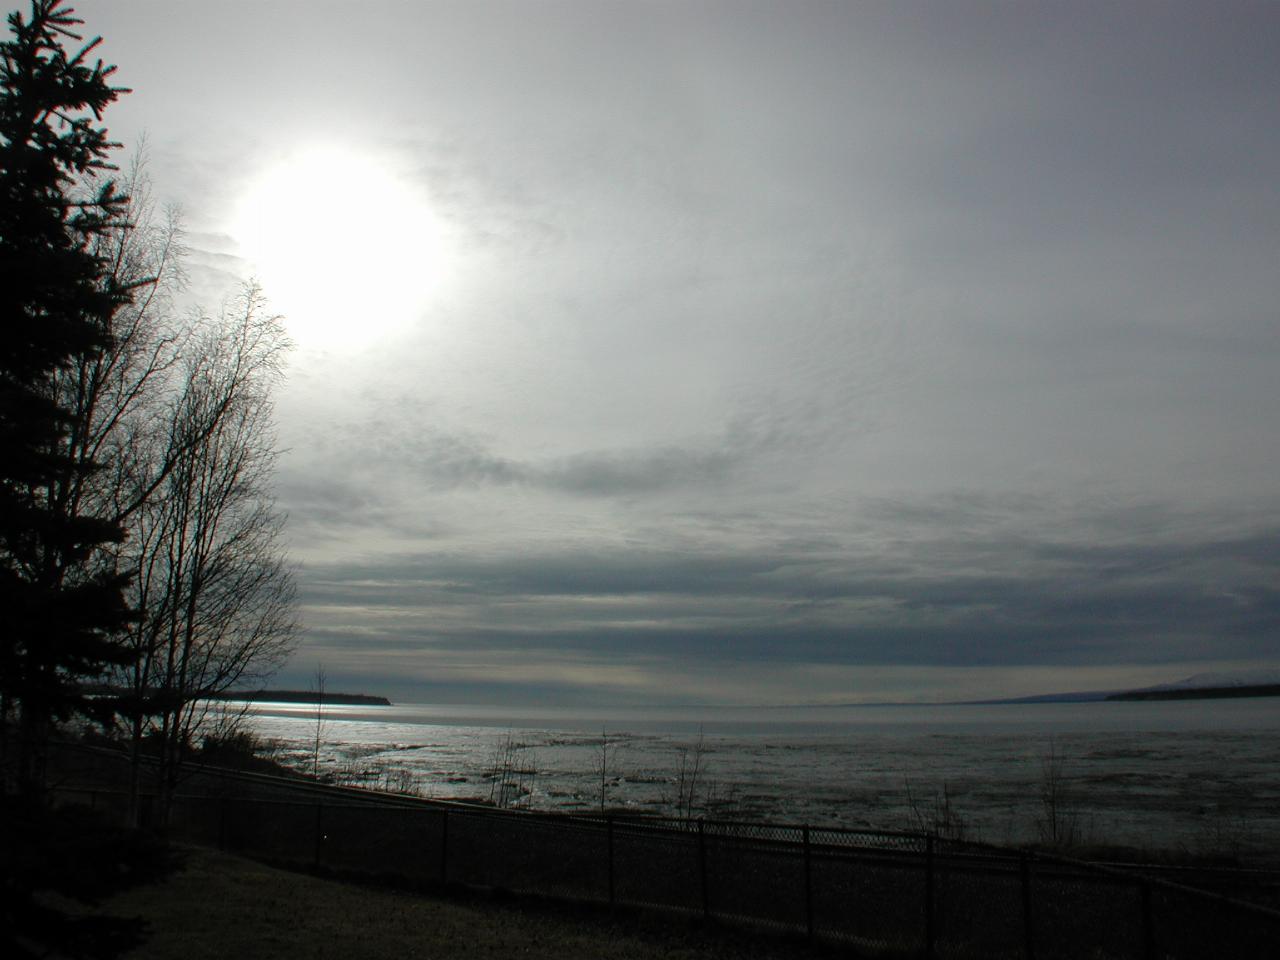 Calm waters of Cook Inlet viewed from coastal walking trail